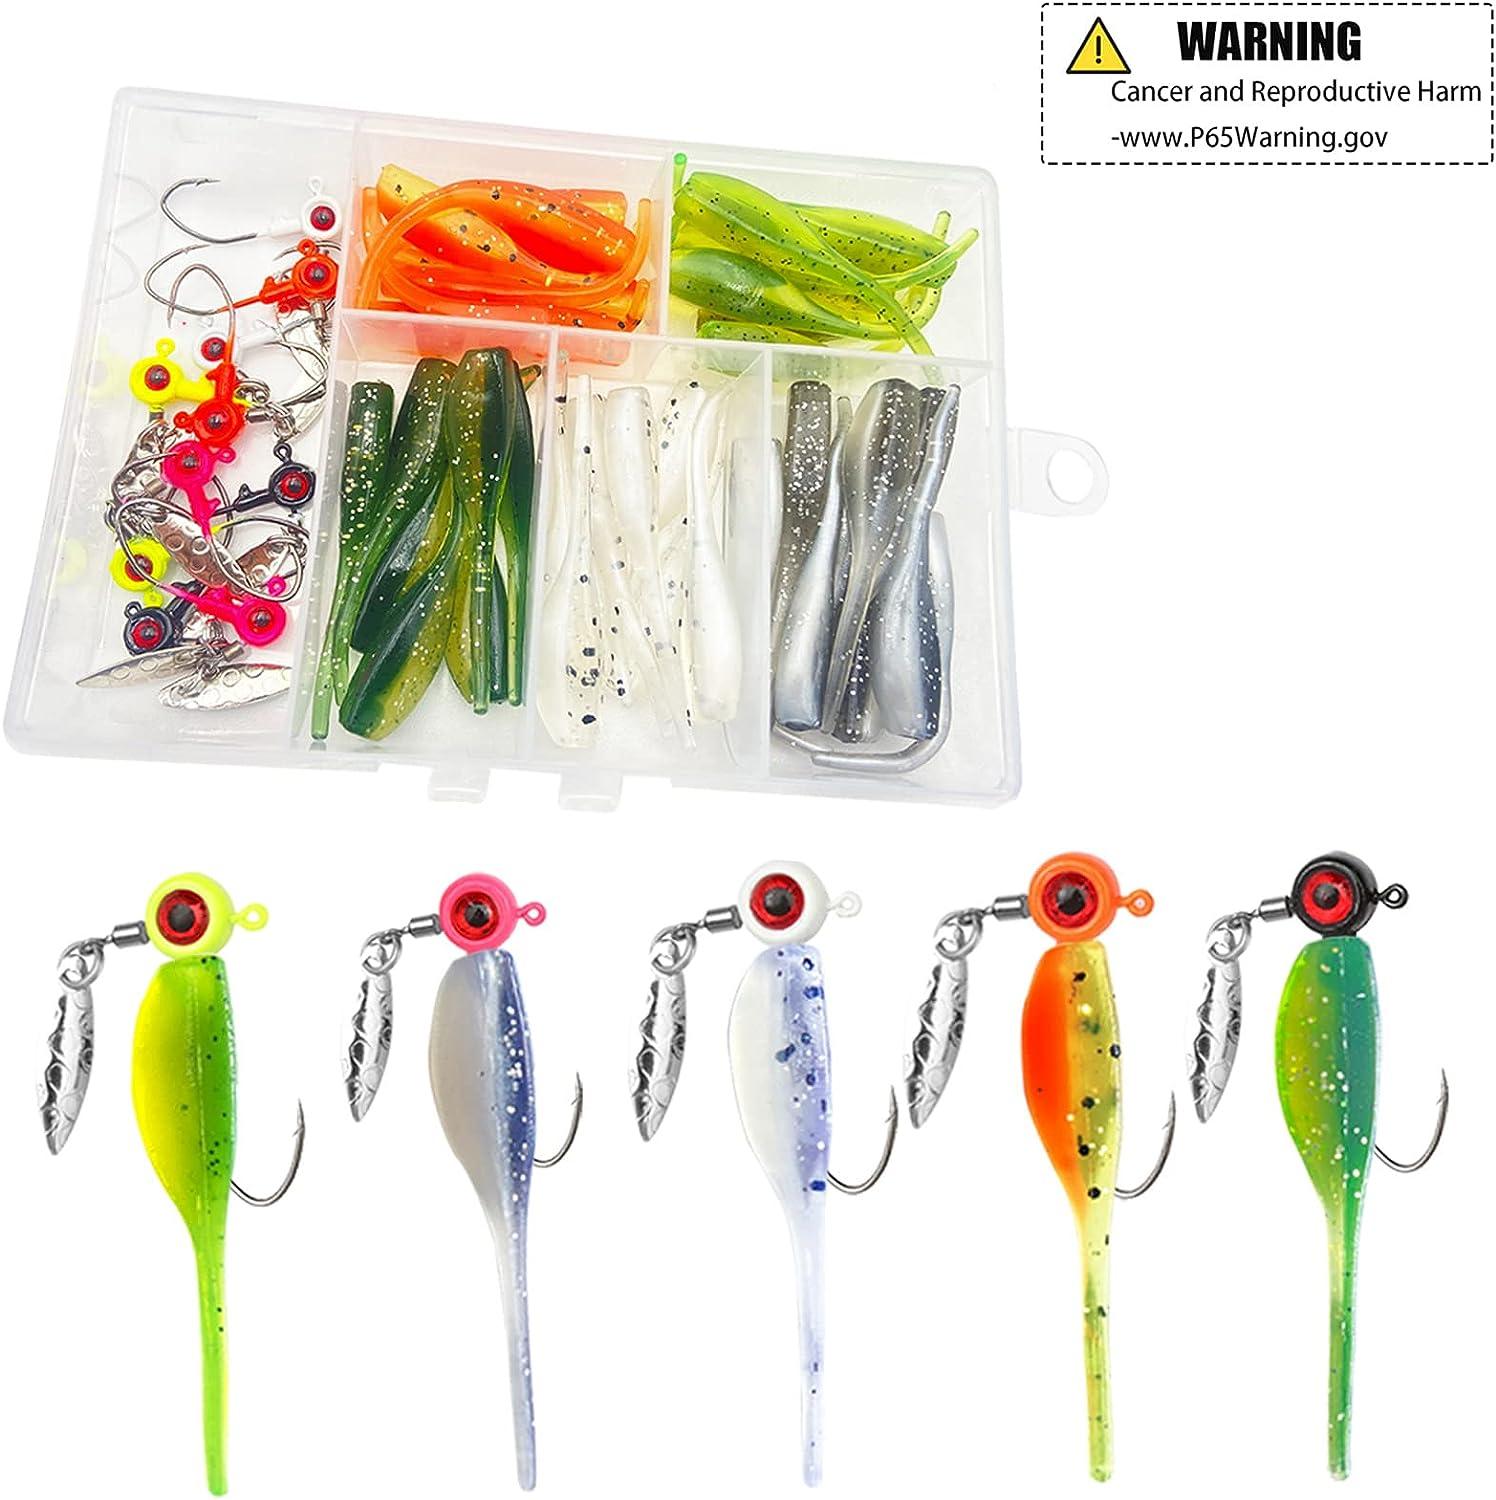  Shelck REELIZE - 2 Crappie Jigs (52pcs), Panfish Lures and  Soft Lures for Trout, Bluegill and Bass. Swimbaits with Jig Head, 20  Finesse Tails, 20 Paddle Tail Swimbaits and 12